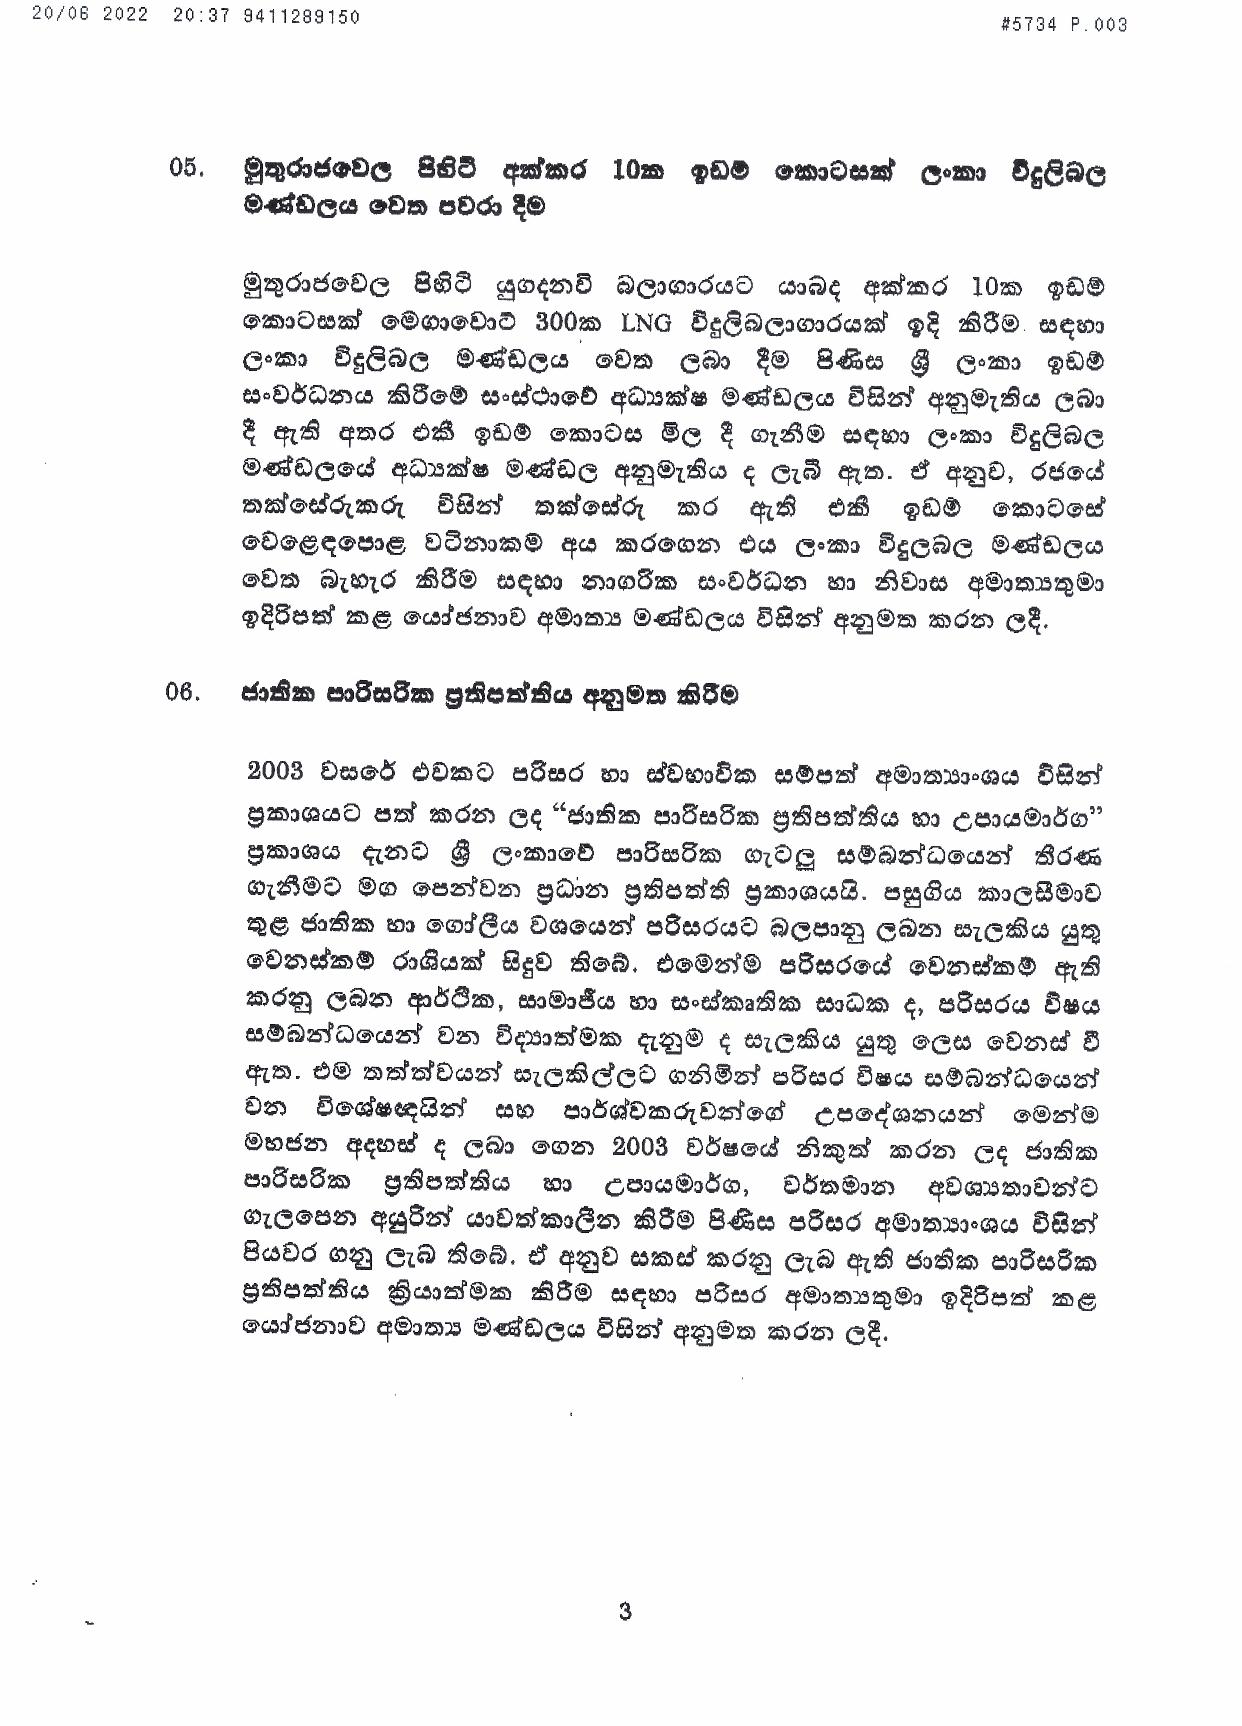 Cabinet Decision on 20.06.2022 page 003